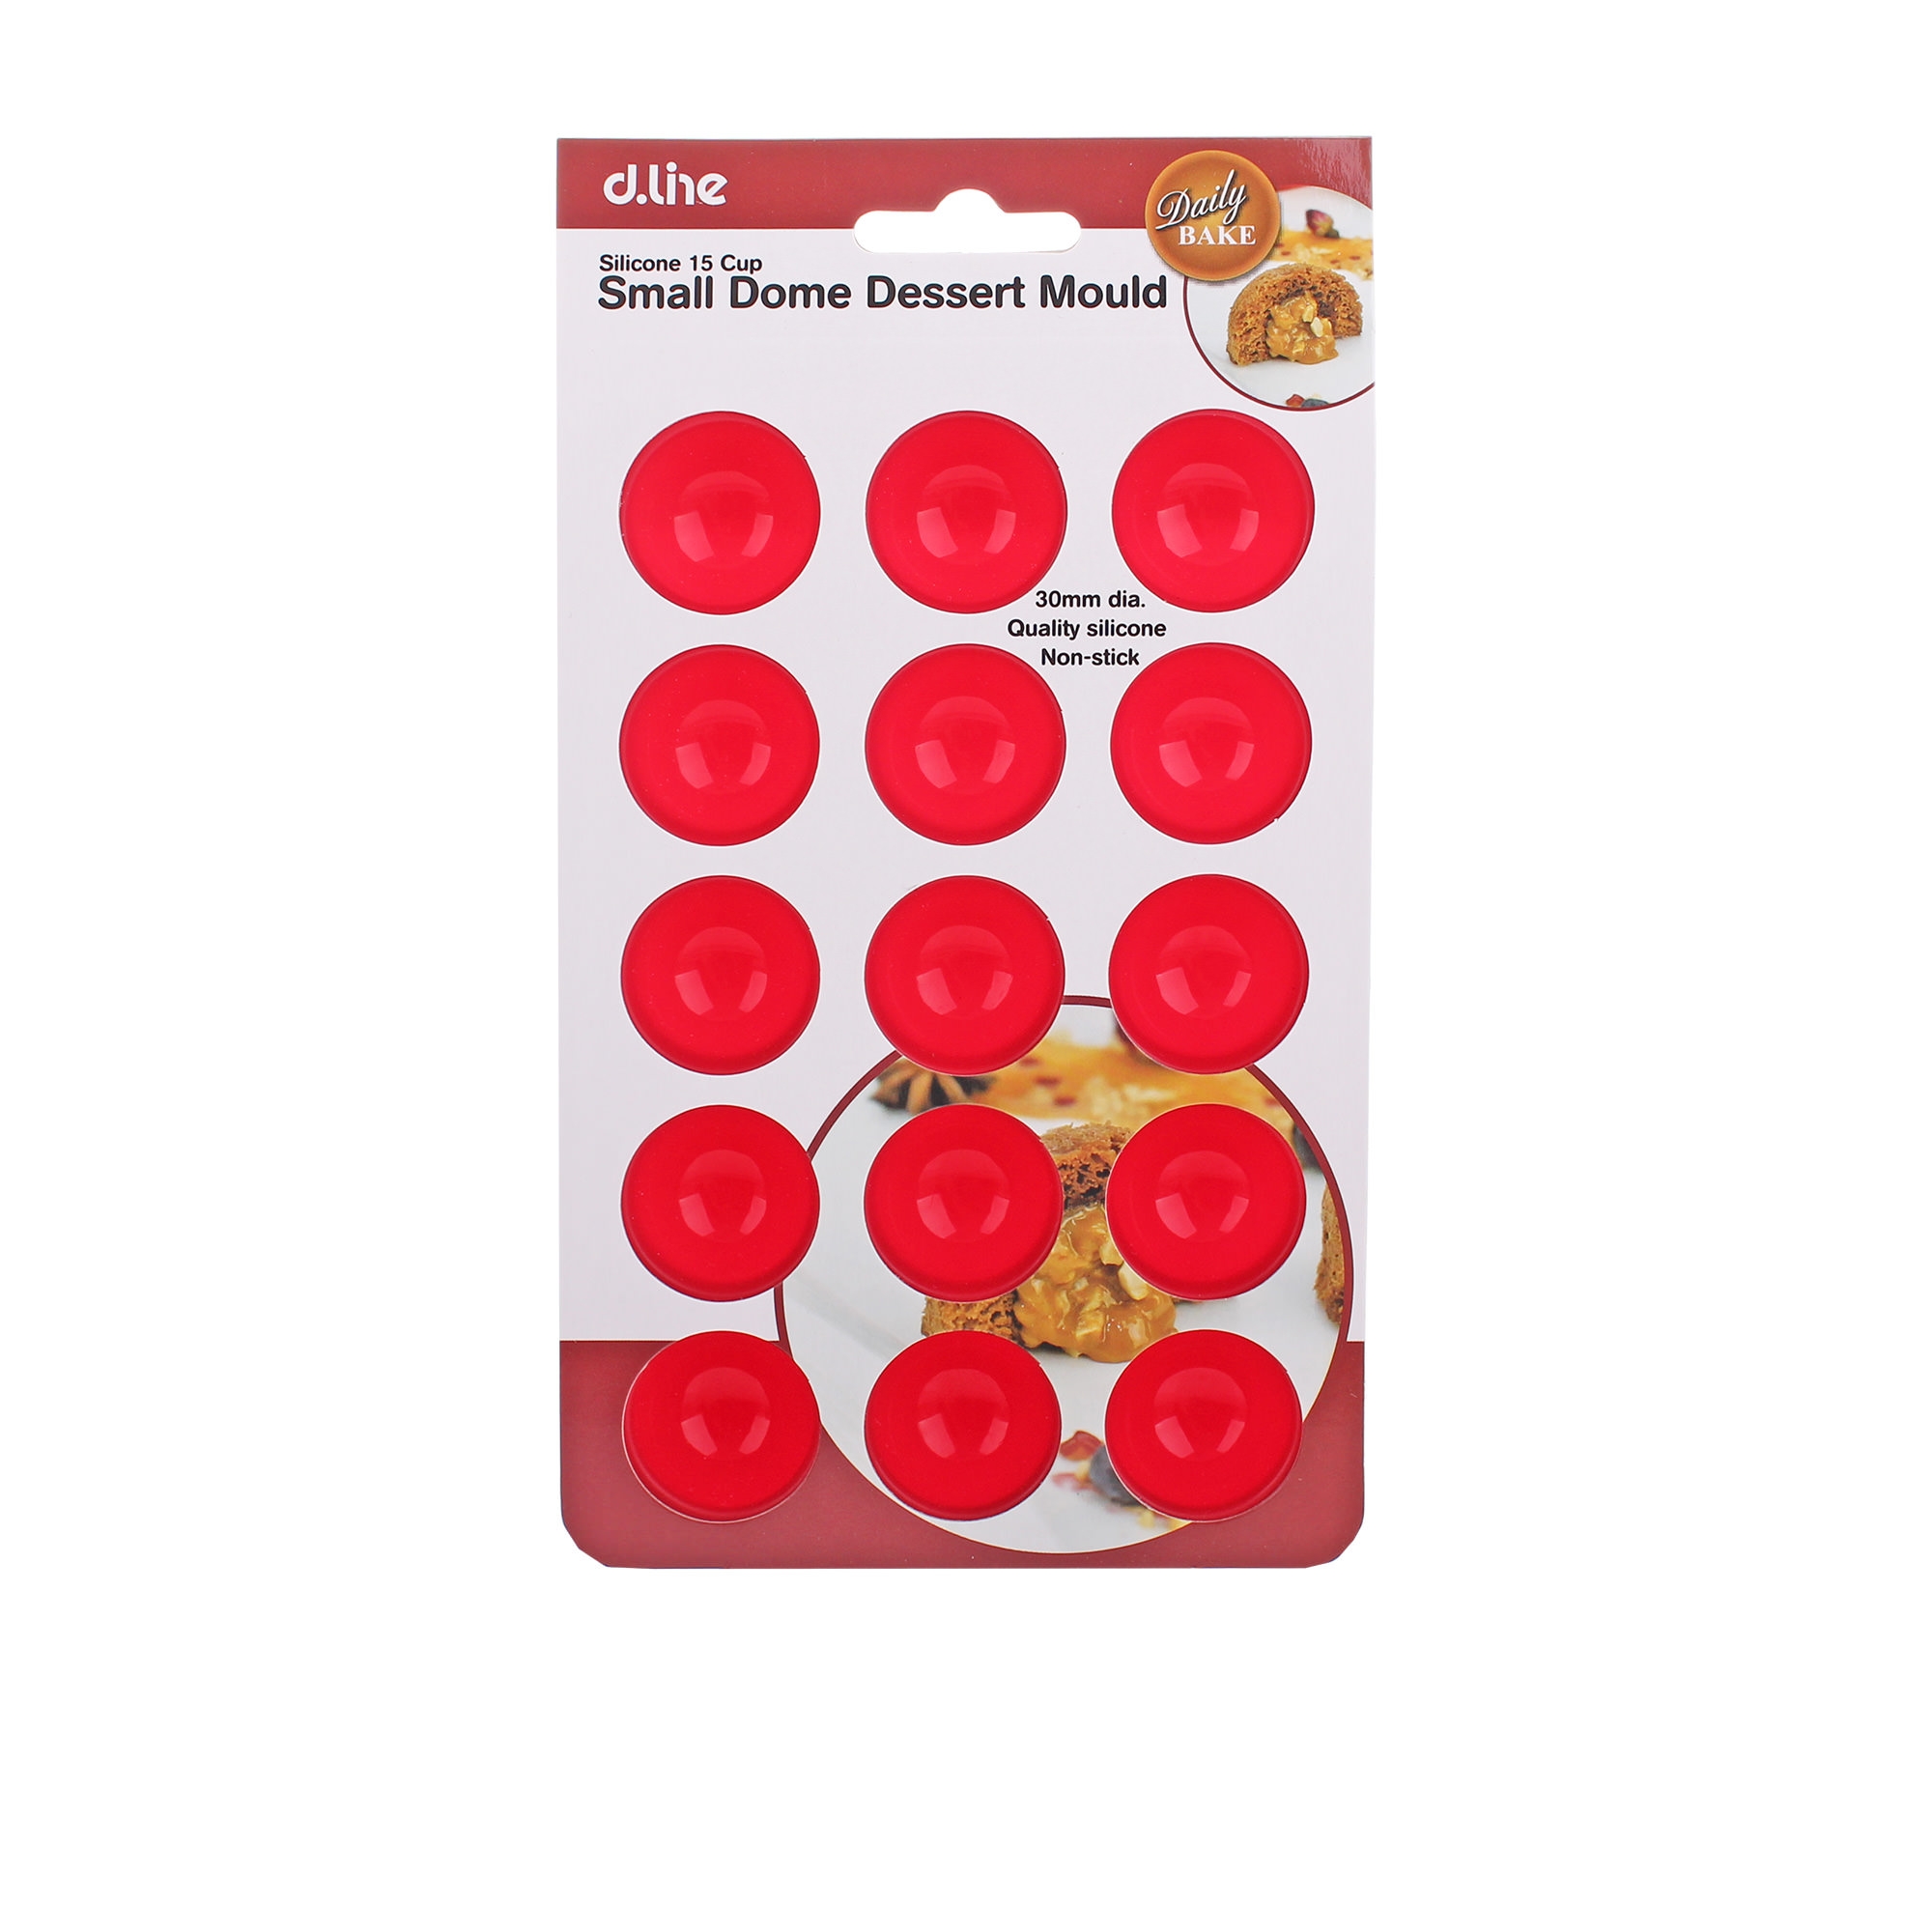 Daily Bake Small Dome Dessert Mould 15 Cup Red Image 2